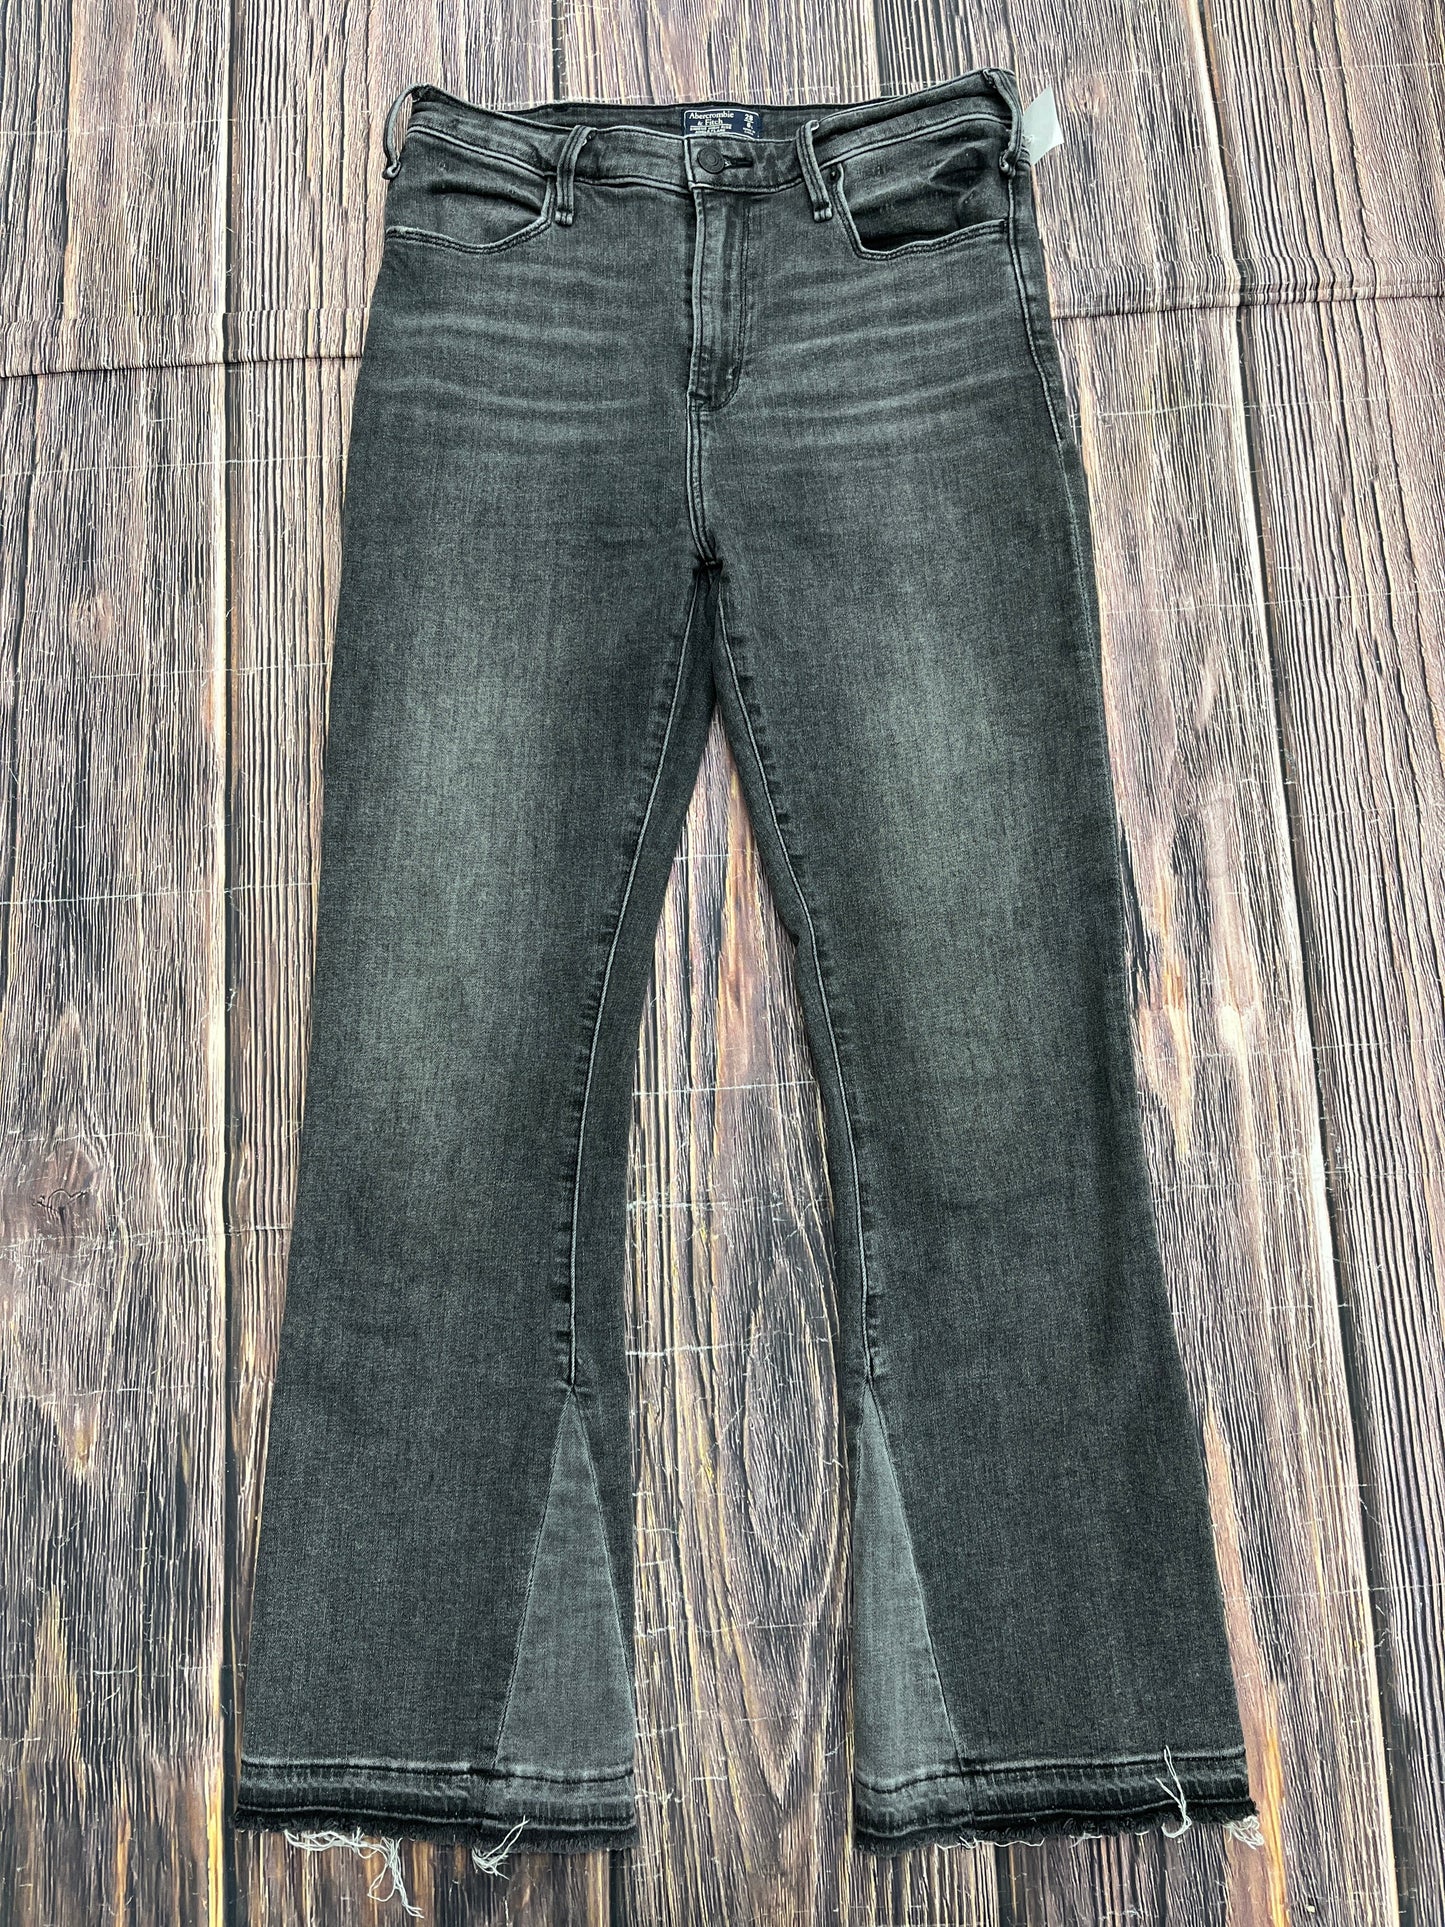 Jeans Flared By Abercrombie And Fitch  Size: 6long